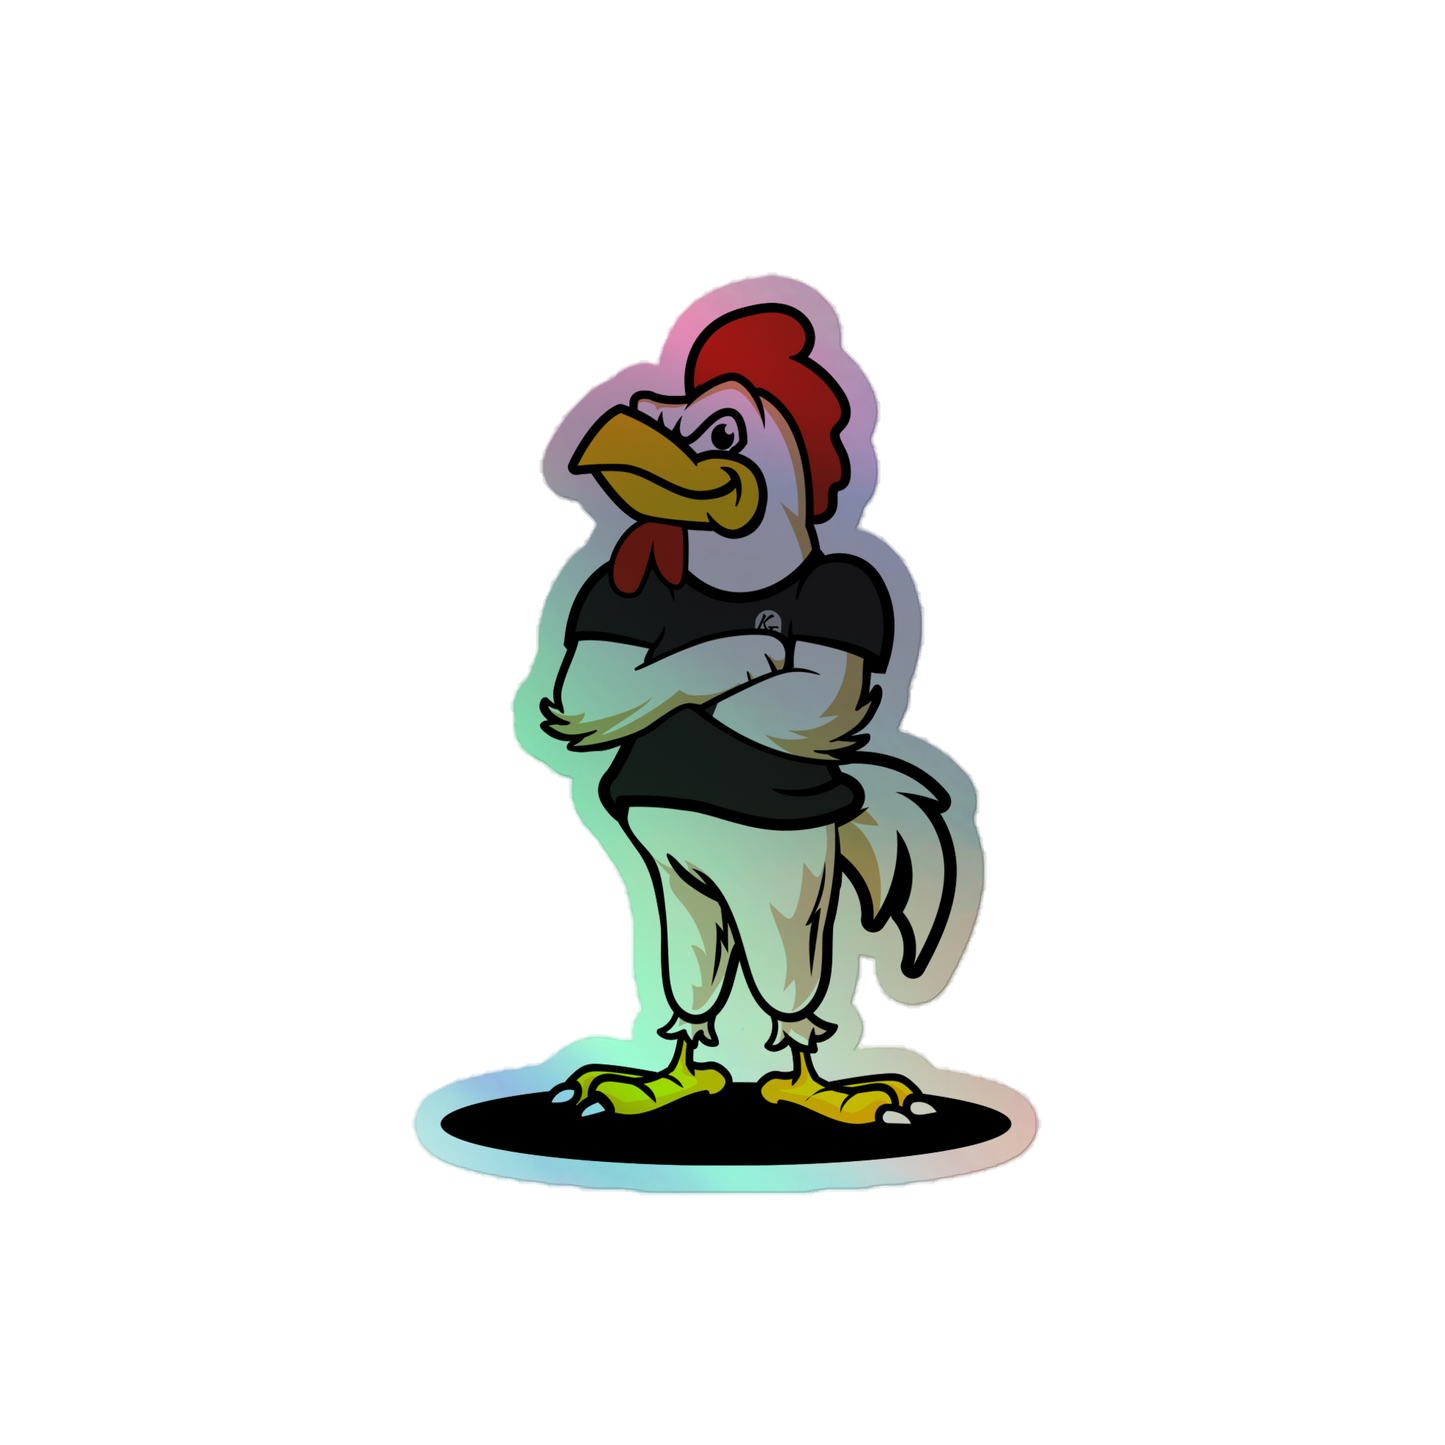 Kentucky Fried "George" Mascot Holographic stickers